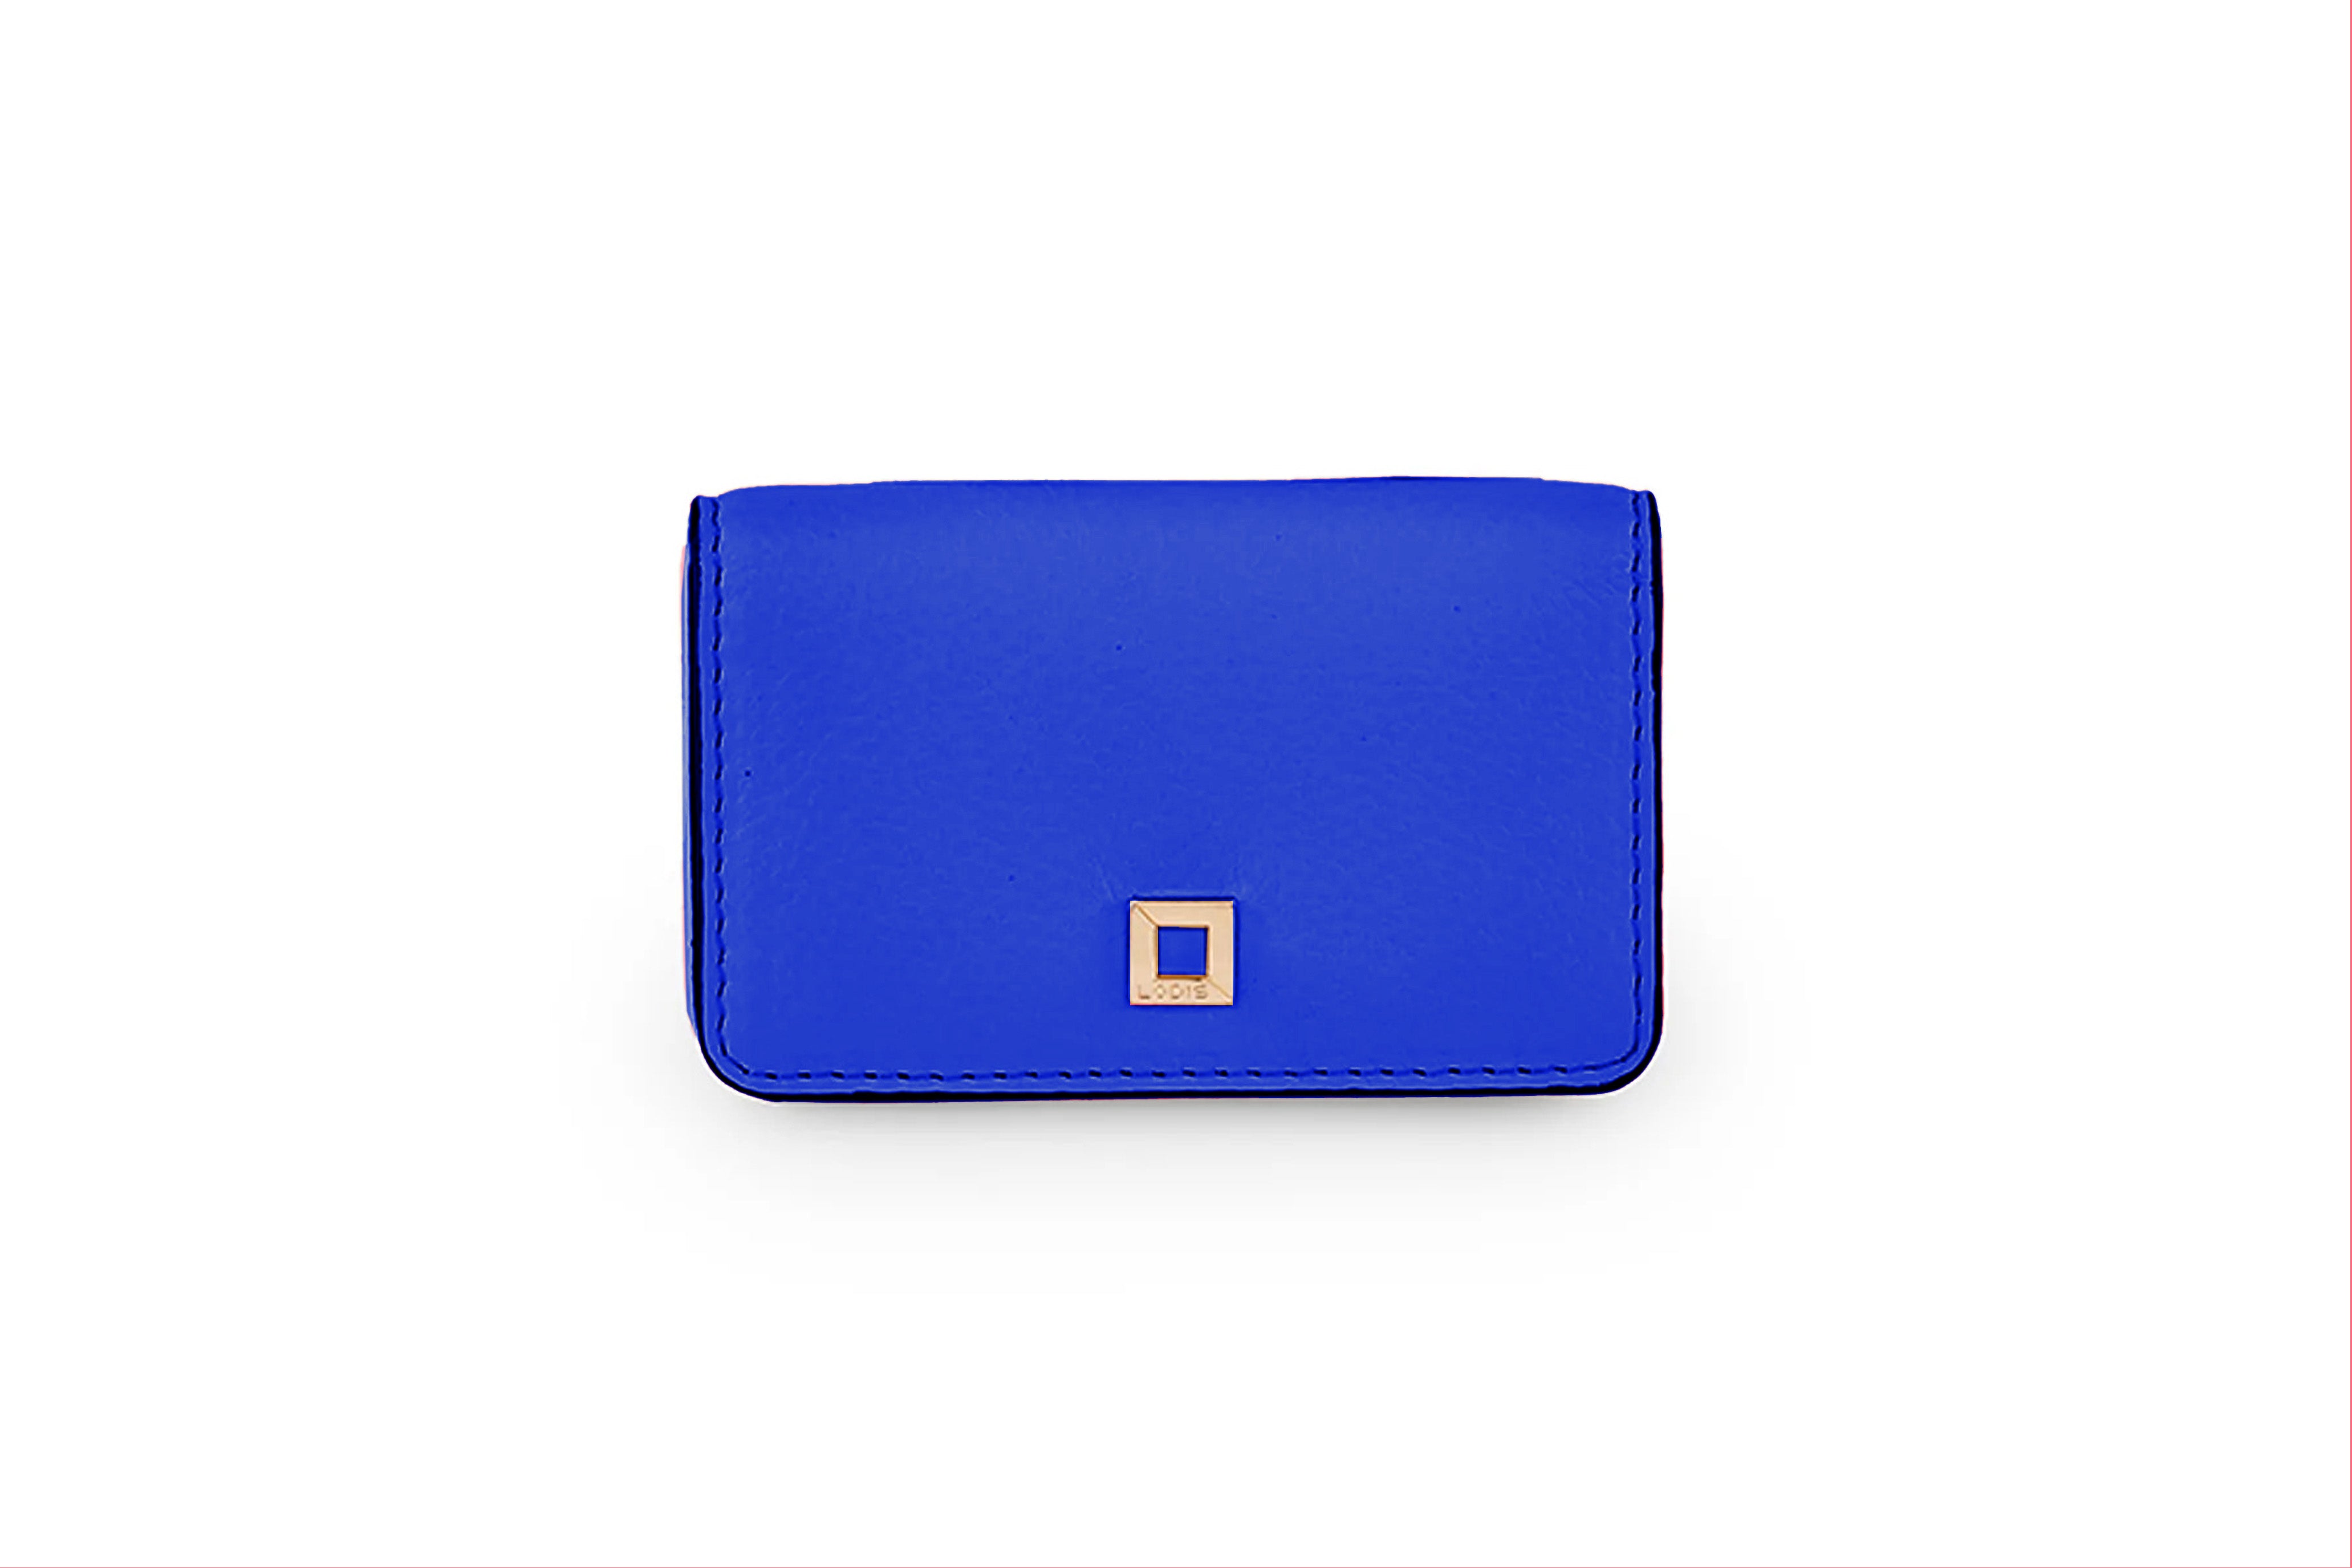 Be Organized With Julia slim Card Case| Lodis